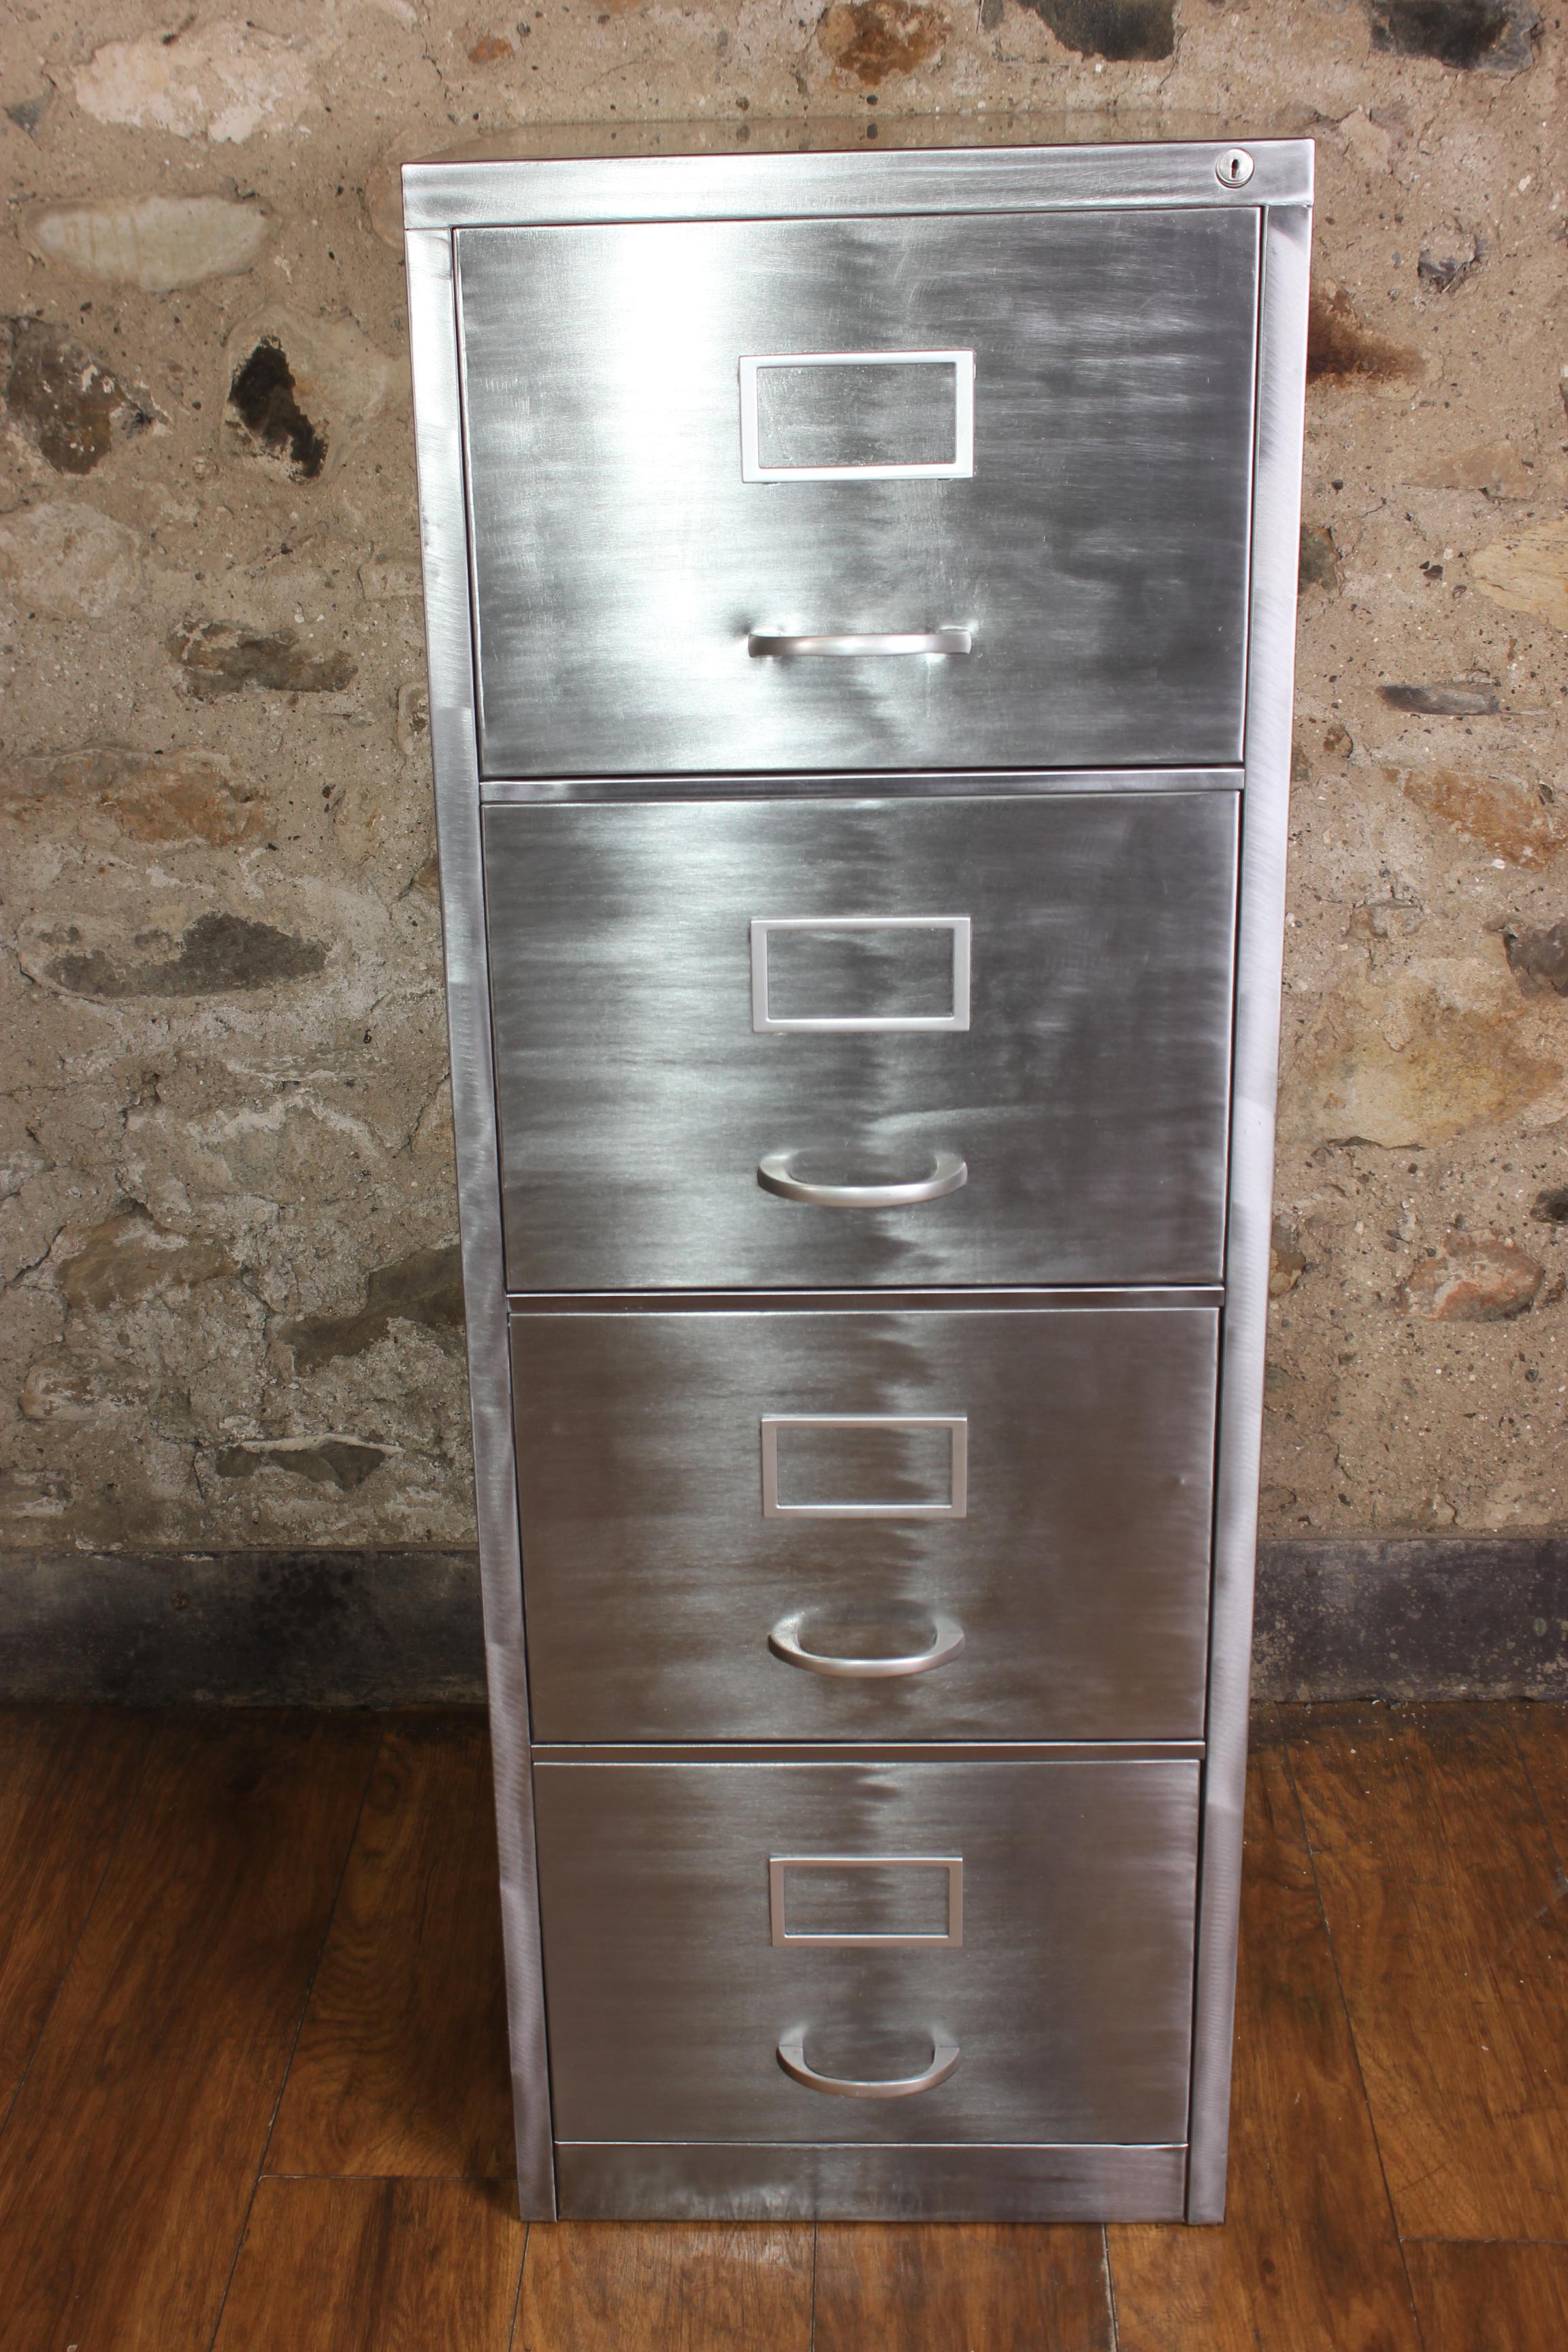 This vintage 4-drawer metal filing cabinet has been stripped back to bare metal to give it a great Industrial look. This interesting cabinet is full of character and an absolute must for any home office/study. It has 4 deep and roomy drawers and